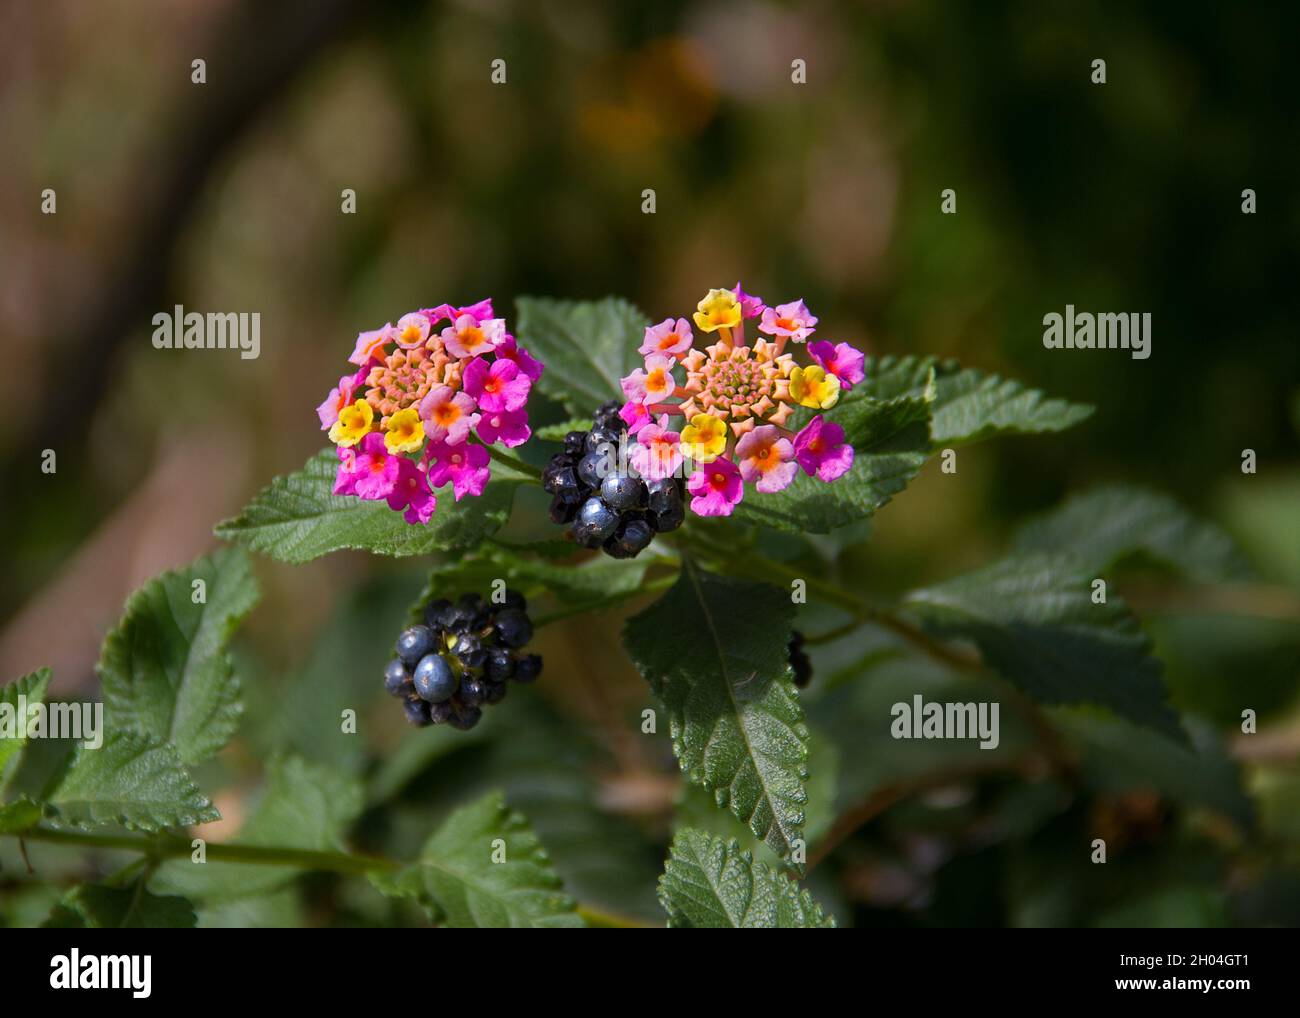 Mature fruits, leaves and flowers in several colors of the invasive species Lantana camara Stock Photo